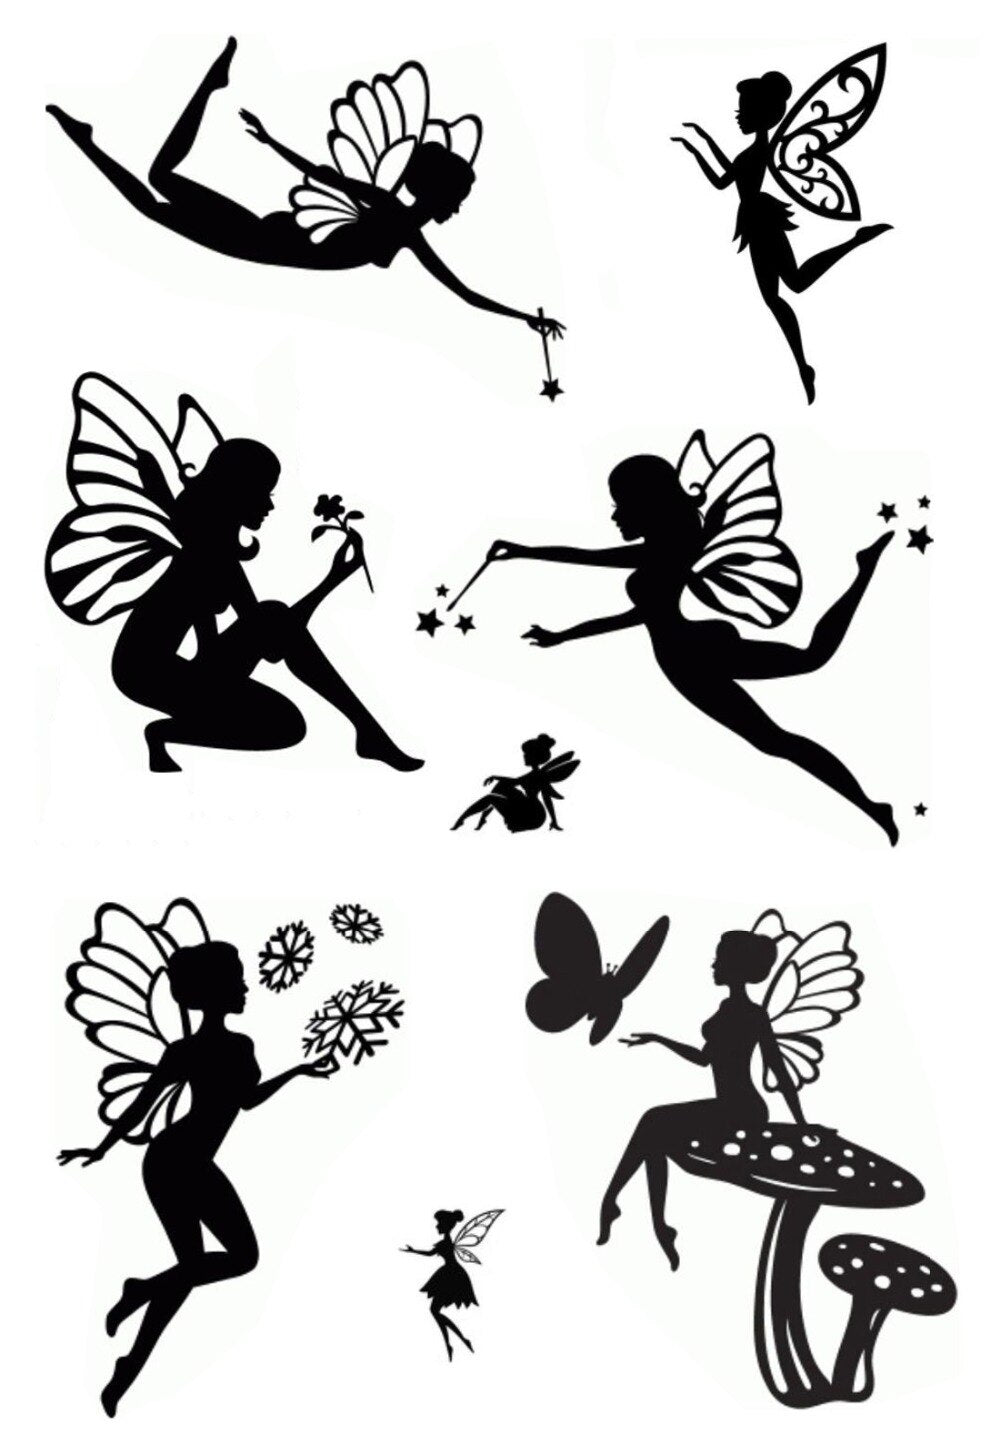 Dainty Fairies Transparent Stamps, 11 cm x 16 cm/4.33 in x 6.29 in